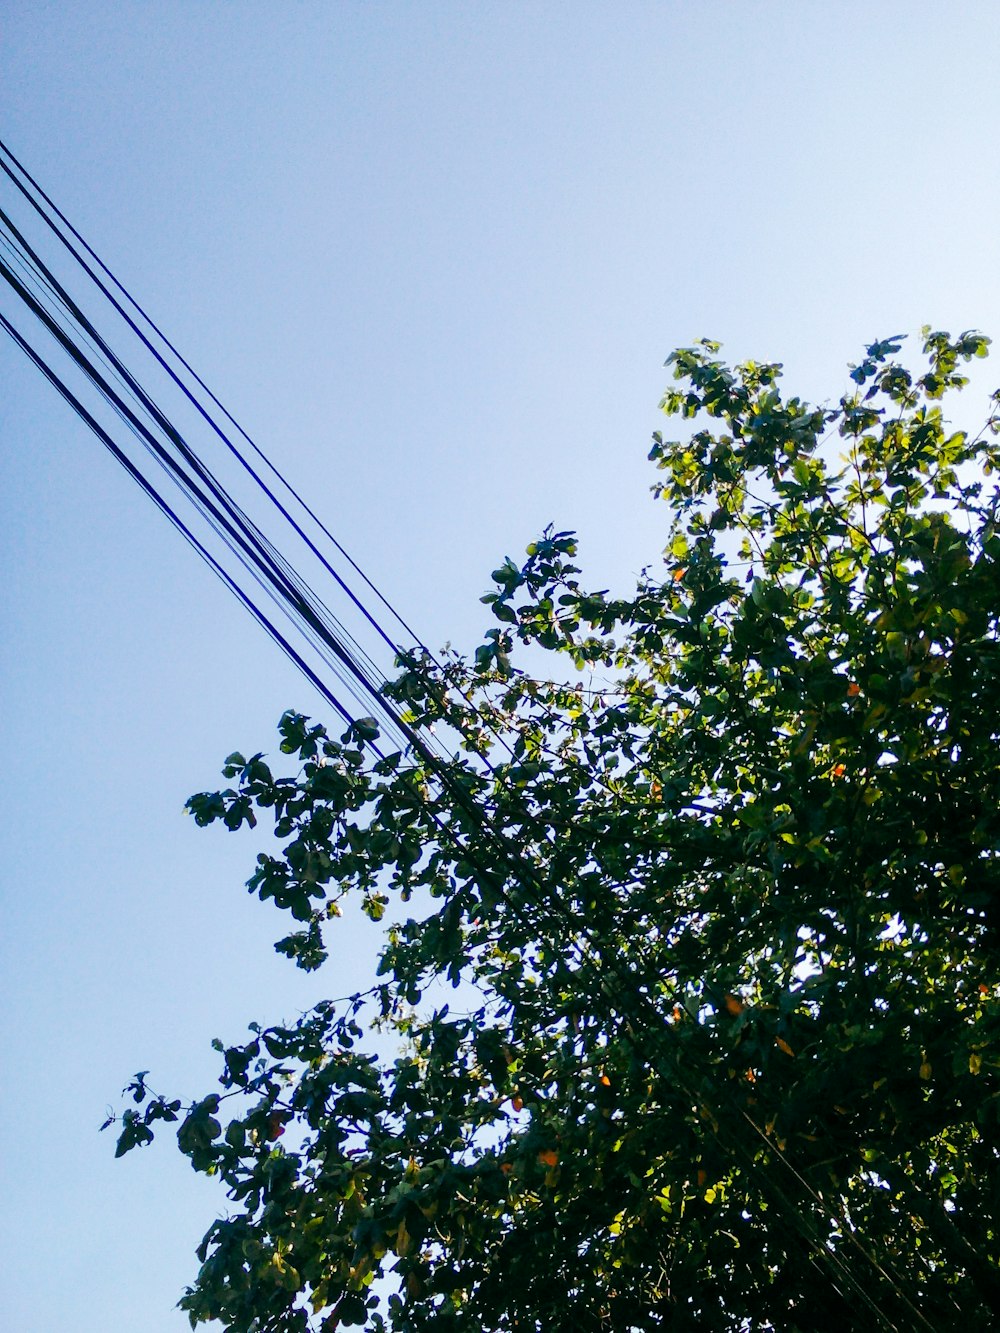 a telephone pole and a tree in front of a blue sky